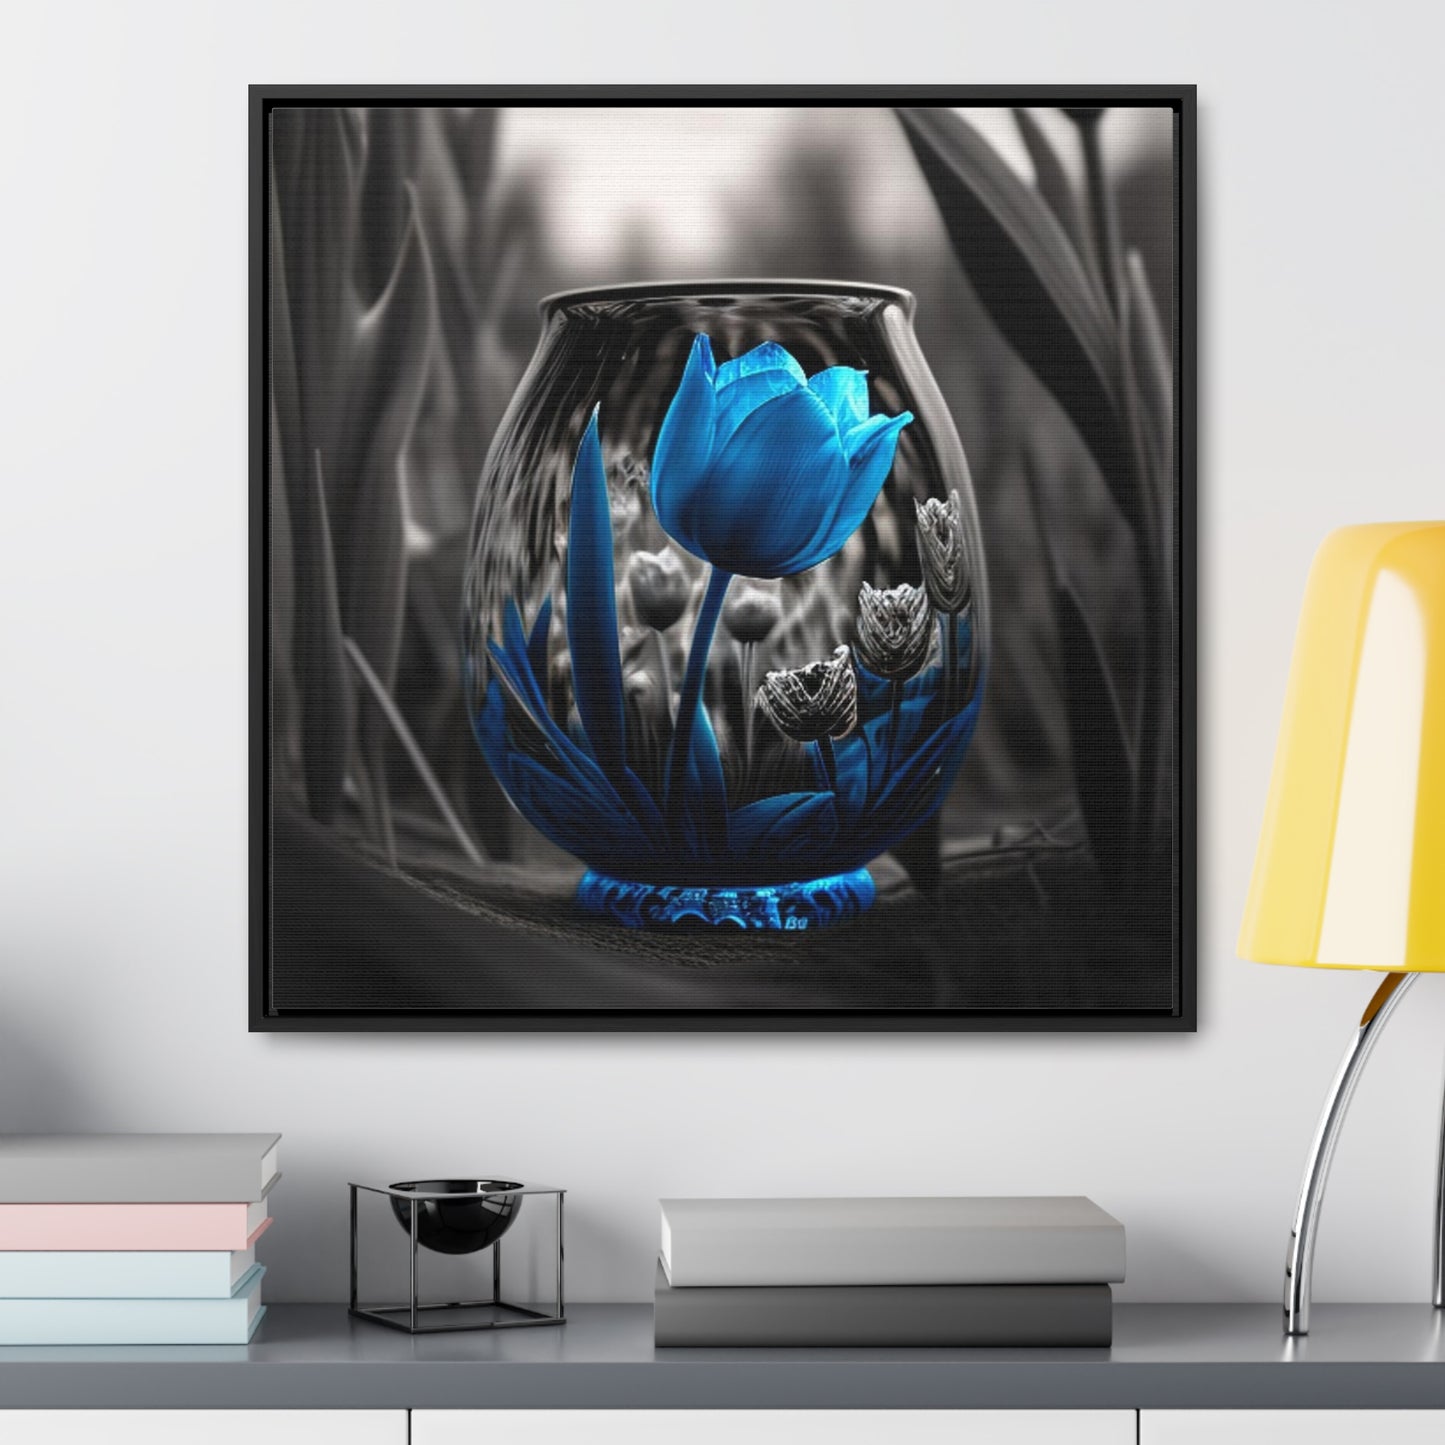 Gallery Canvas Wraps, Square Frame Tulip Blue 4